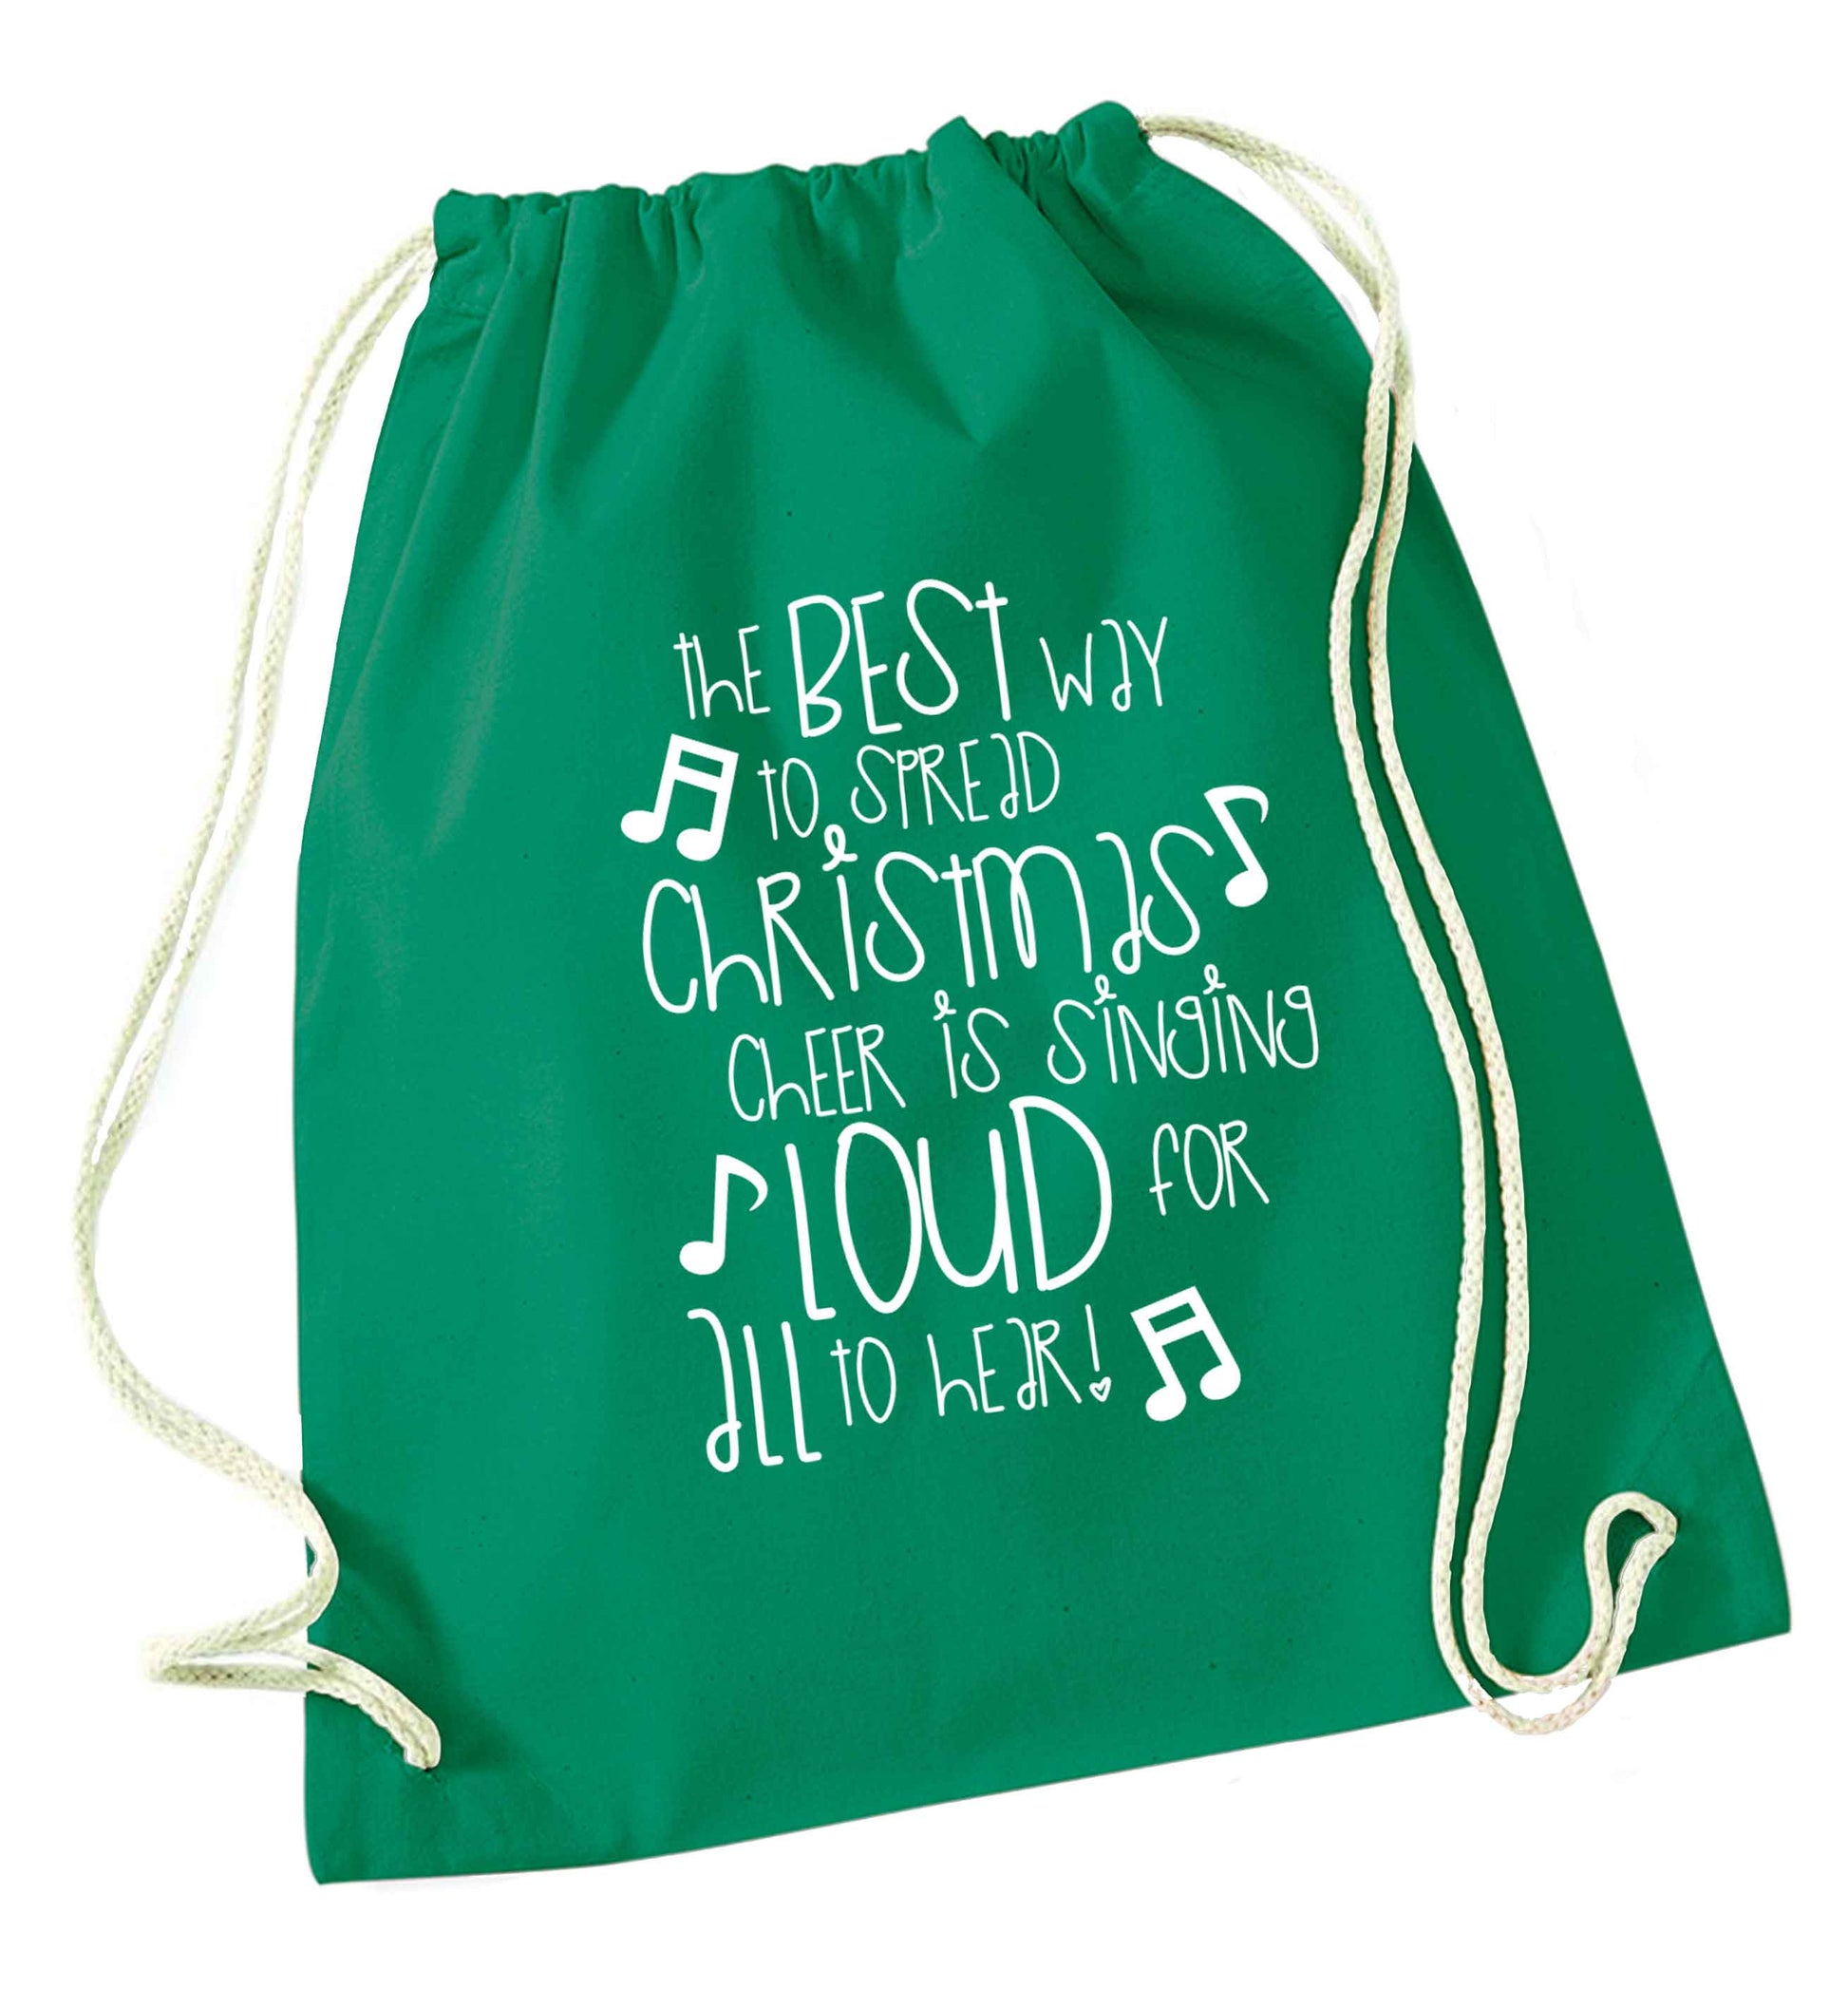 The best way to spread Christmas cheer is singing loud for all to hear green drawstring bag